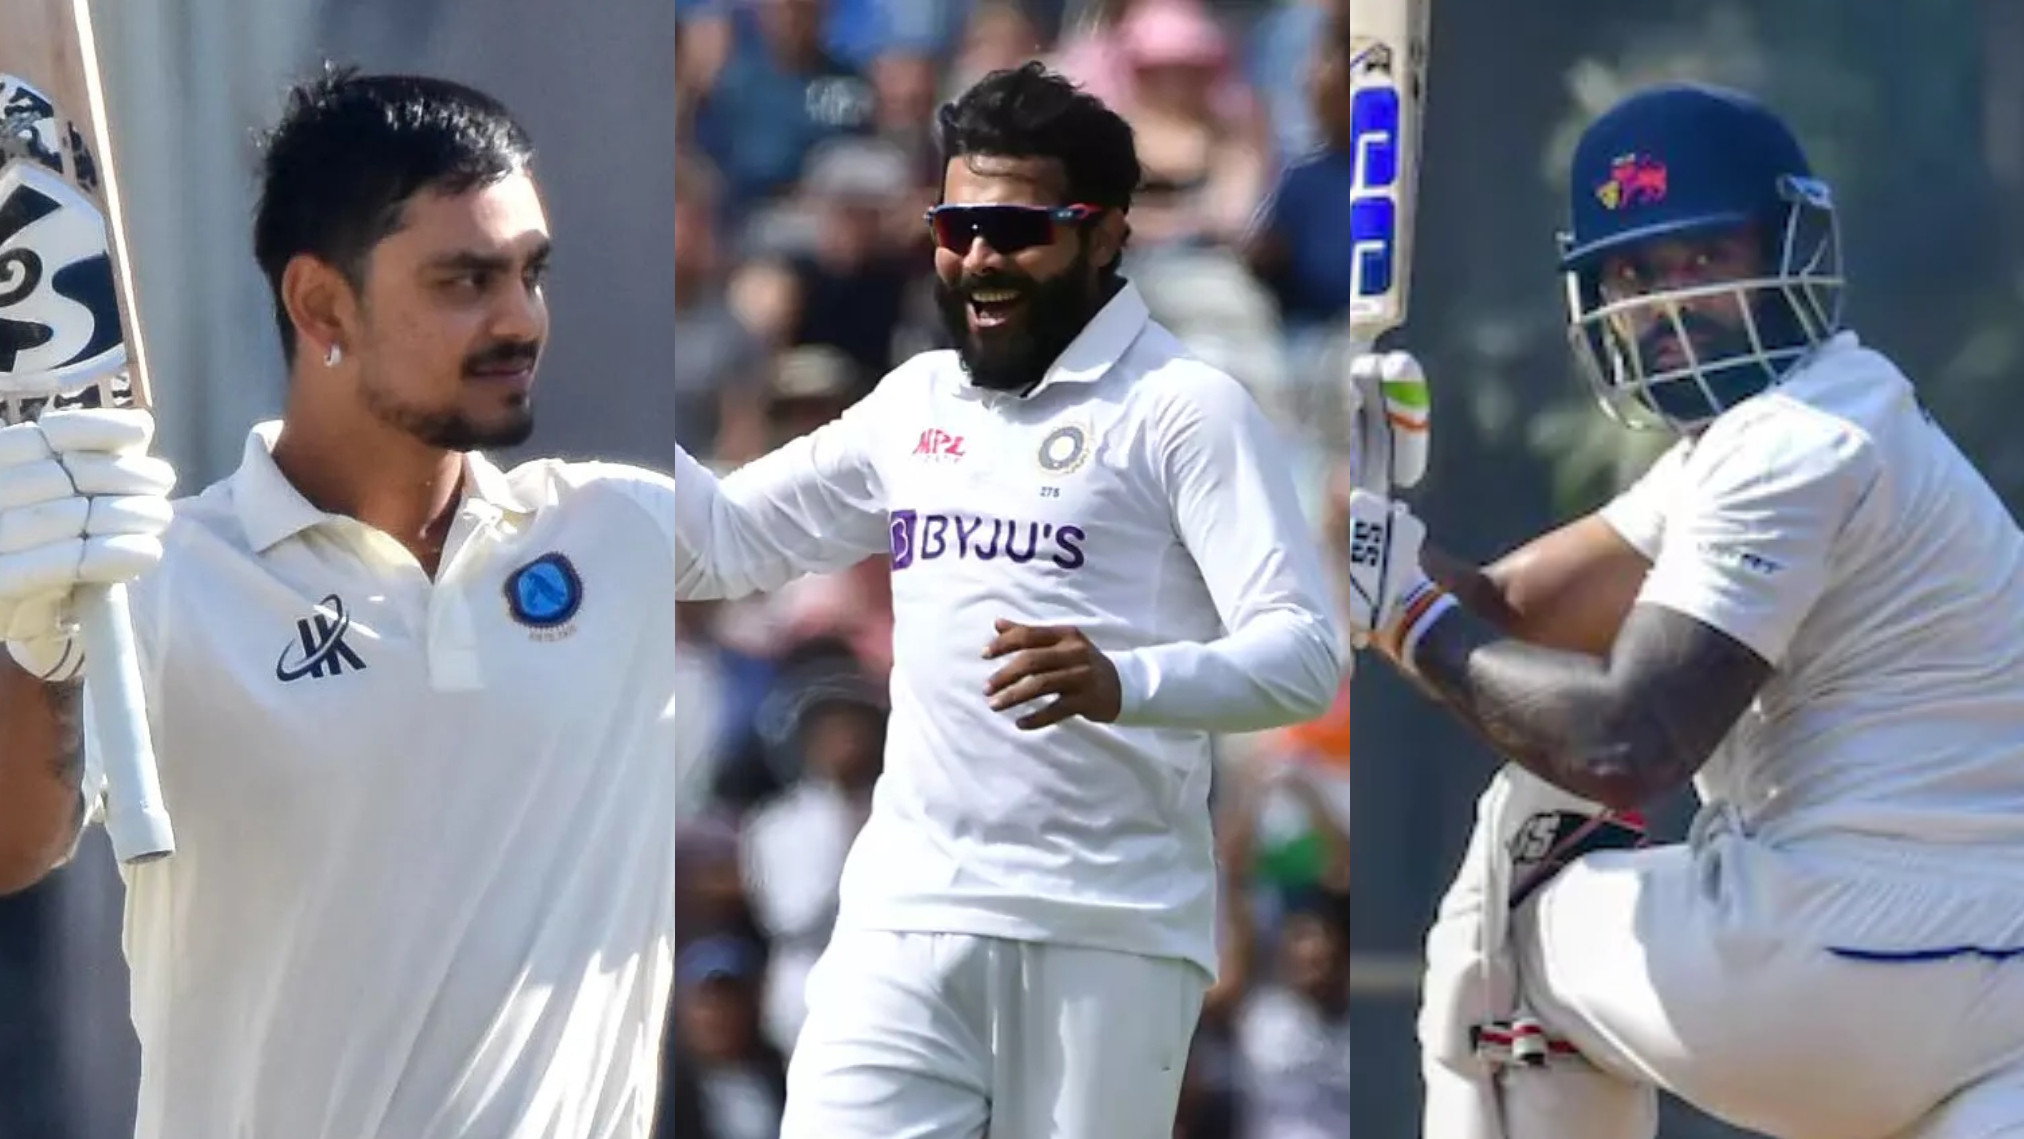 IND v AUS 2023: Kishan, Suryakumar picked as aggressive batting option for Tests; Jadeja asked to play domestic game- Report